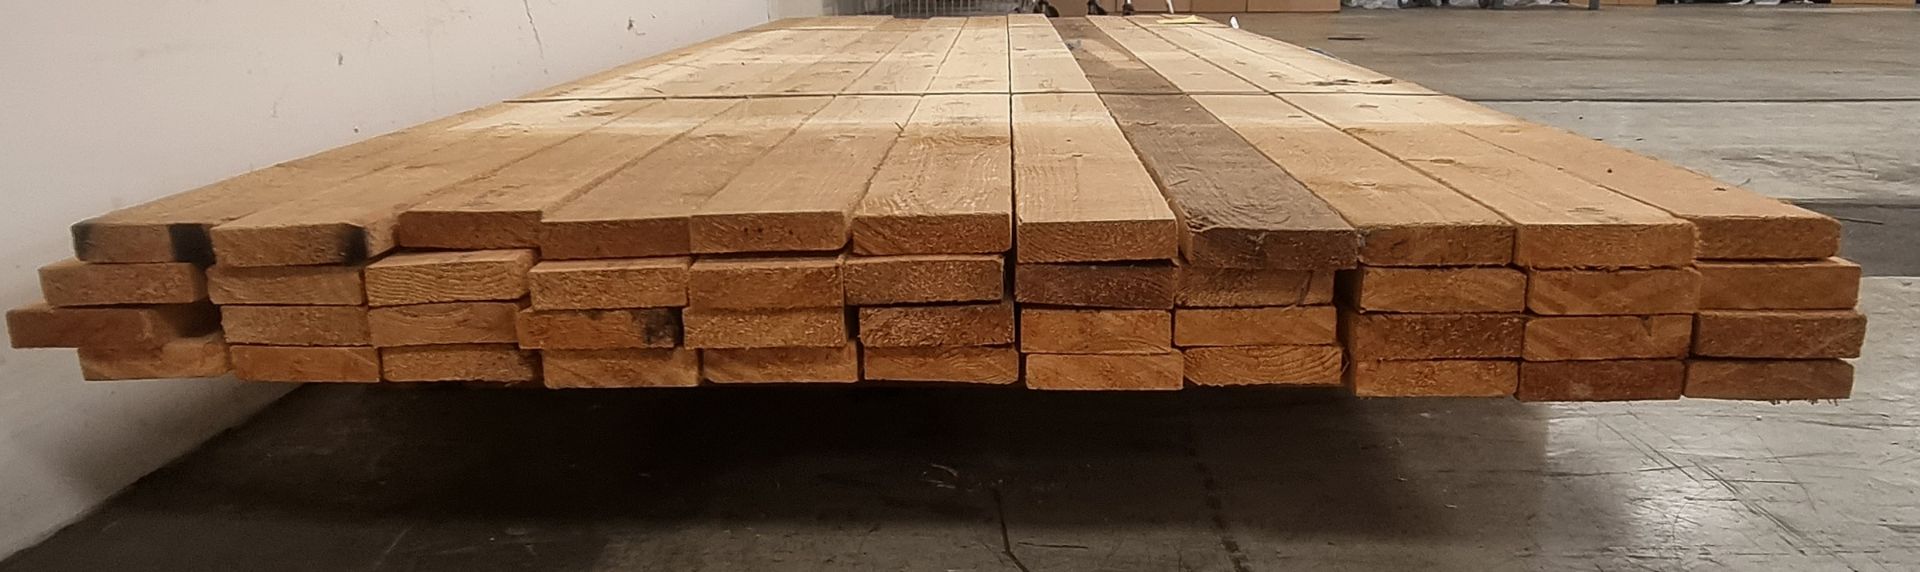 Pallet of 4"x1" softwood various lengths & Pallet of 4"x1" softwood 44pcs - Image 4 of 9